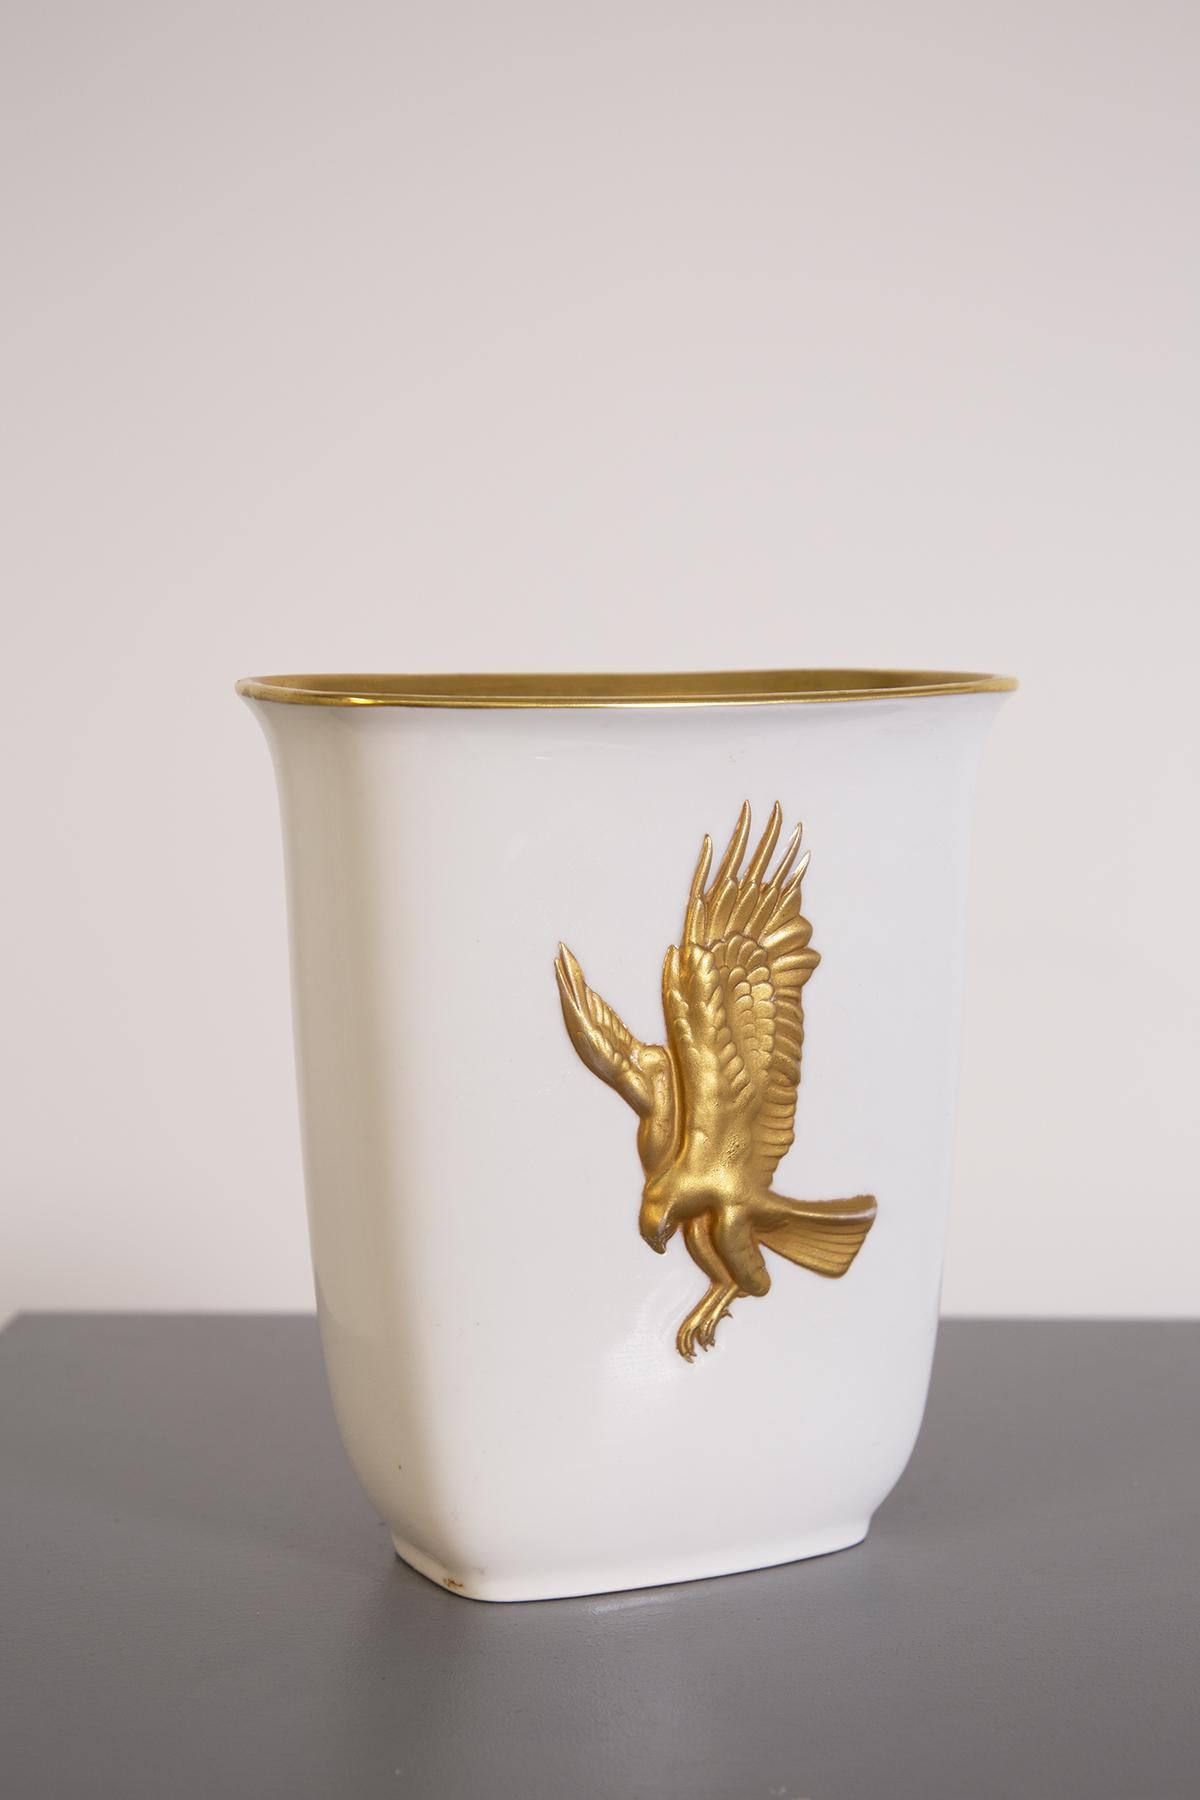 Precious Italian vase from the 1950s made by the great silversmith Arrigo Finzi. The vase has a rectangular shape made of porcelain. Its great elegance and preciousness is given by its entire interior covered in pure gold, and the great mythological